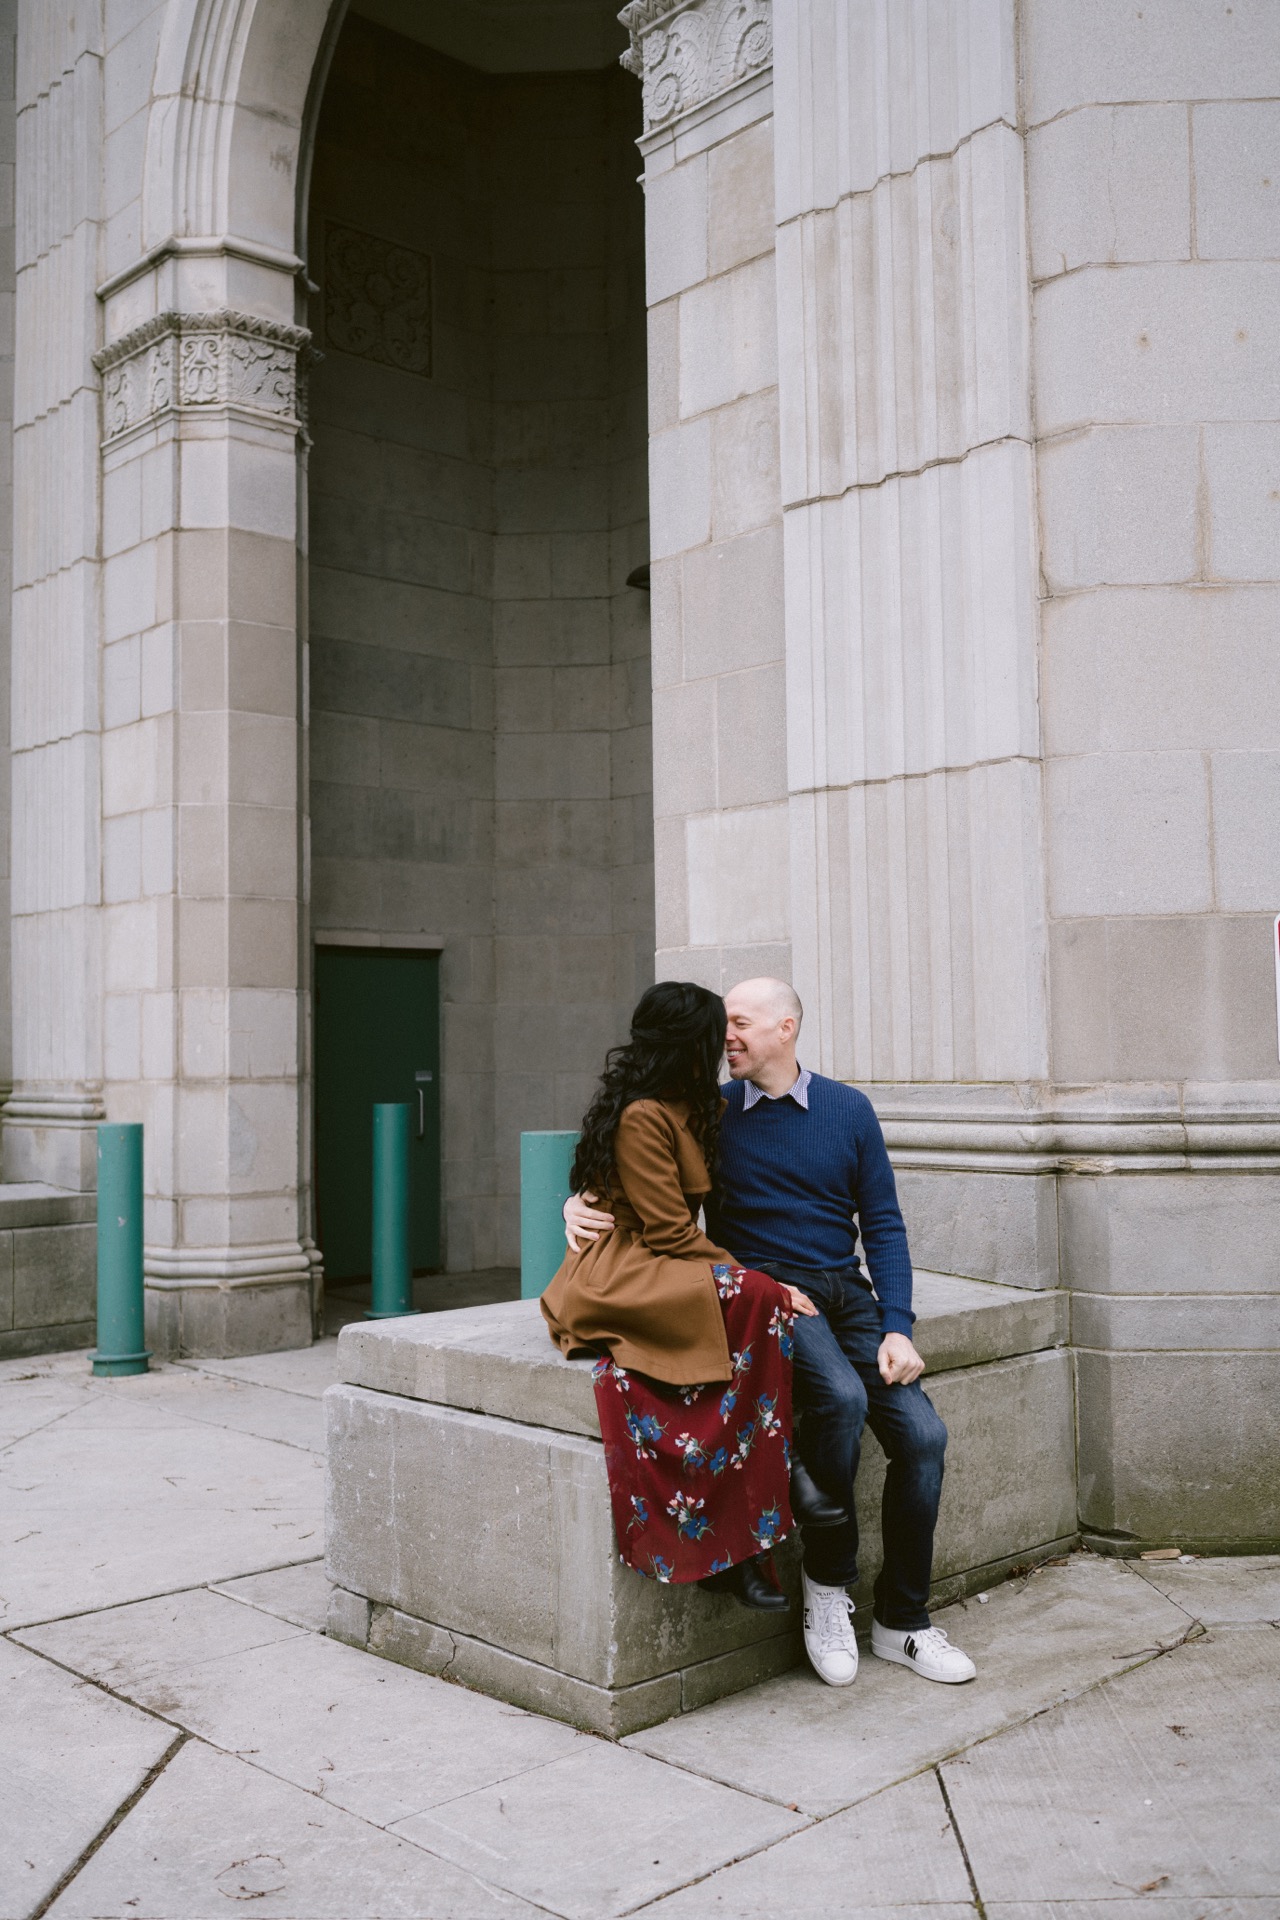 A couple sitting closely together on a stone bench by a building with arches, engaging in a moment of affectionate conversation.